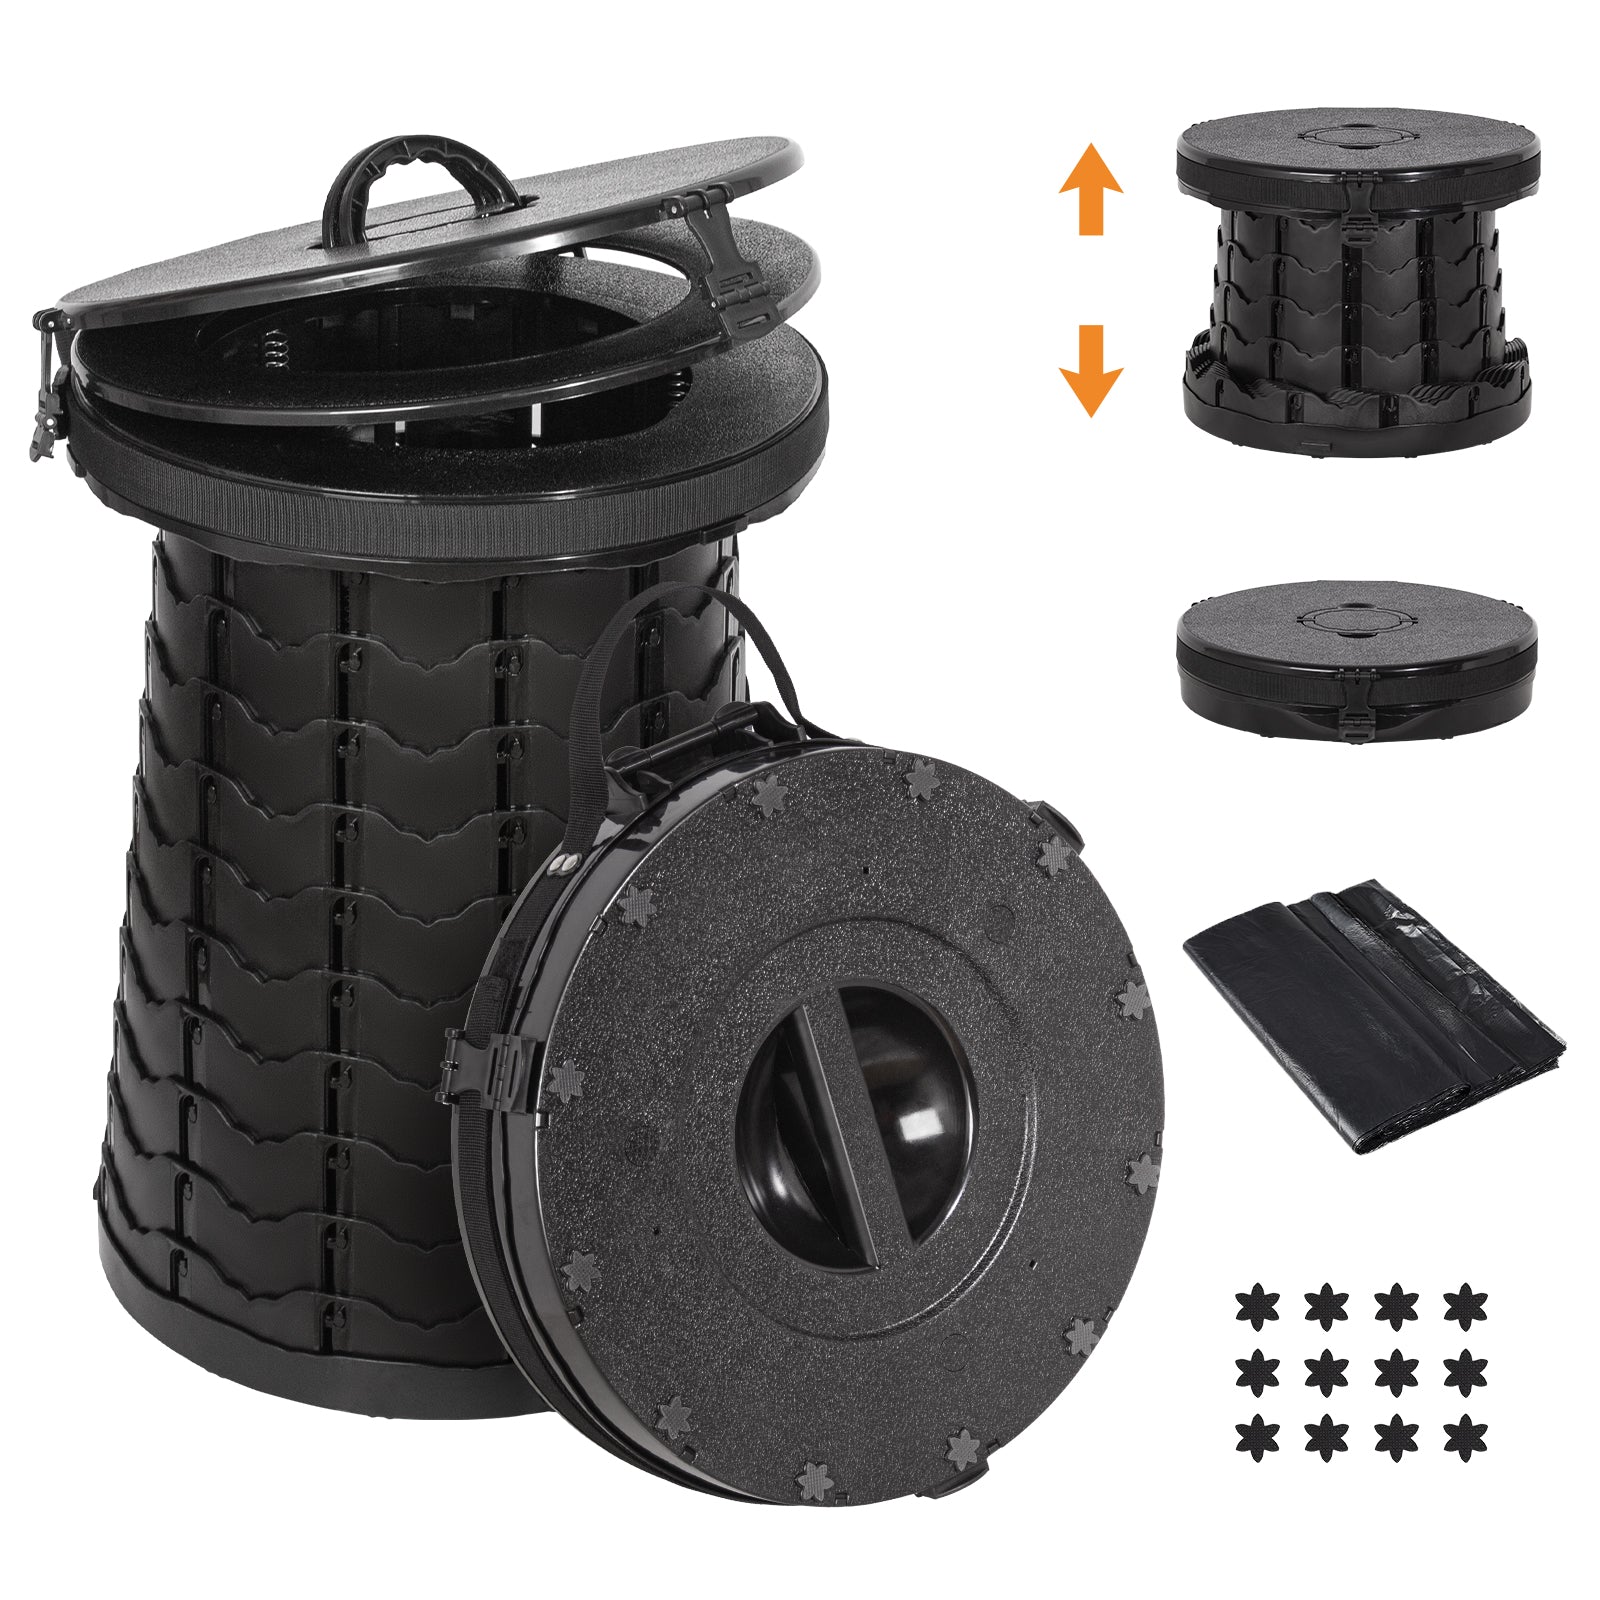 Leogreen-Portable-Camping-Toilet-Portable-Foldable-Lightweight-Hygiene-Hiking-Toilet-Toliet-for-Men-and-Women-for-Camping-Hiking-Excursions-Black